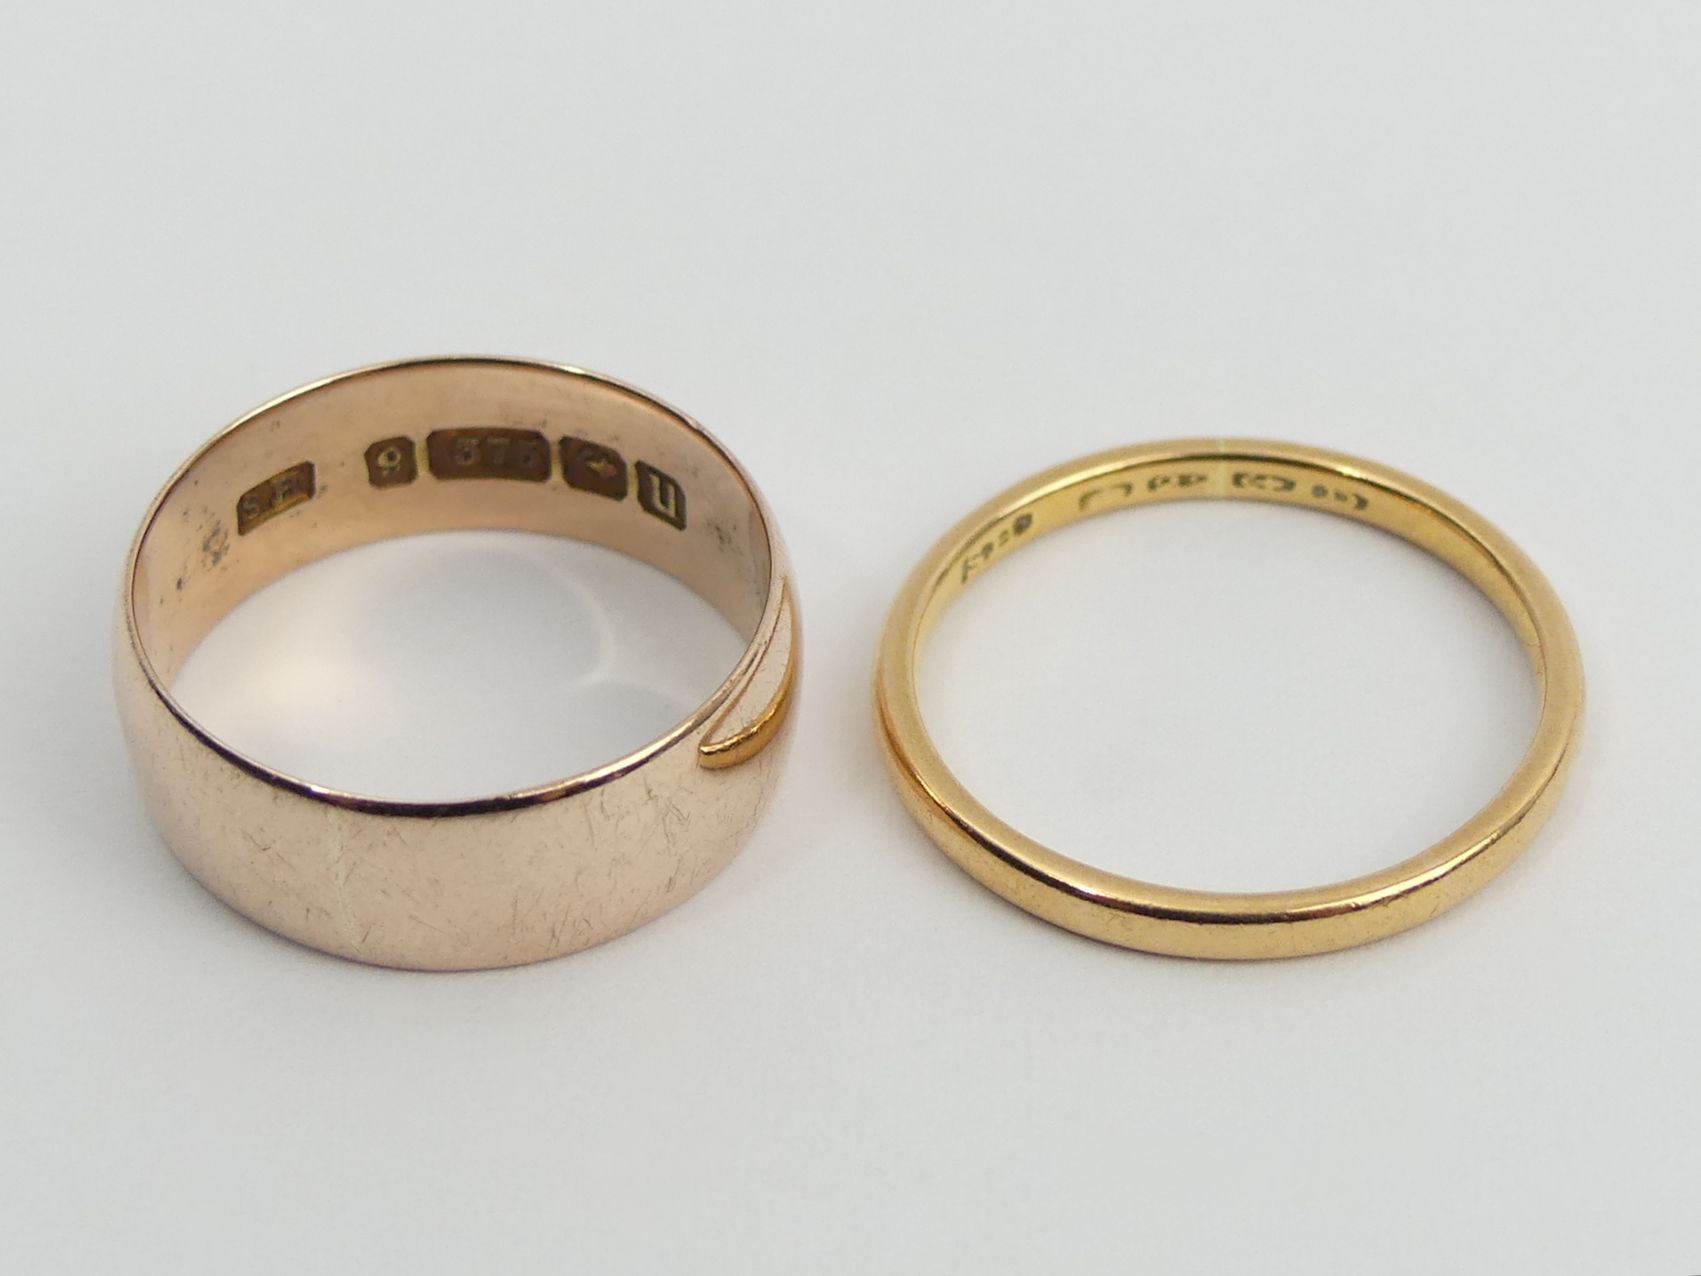 9ct rose gold wedding band, 2.8 grams and a 22ct gold example, 2 grams, both size L. UK Postage £12. - Image 3 of 3